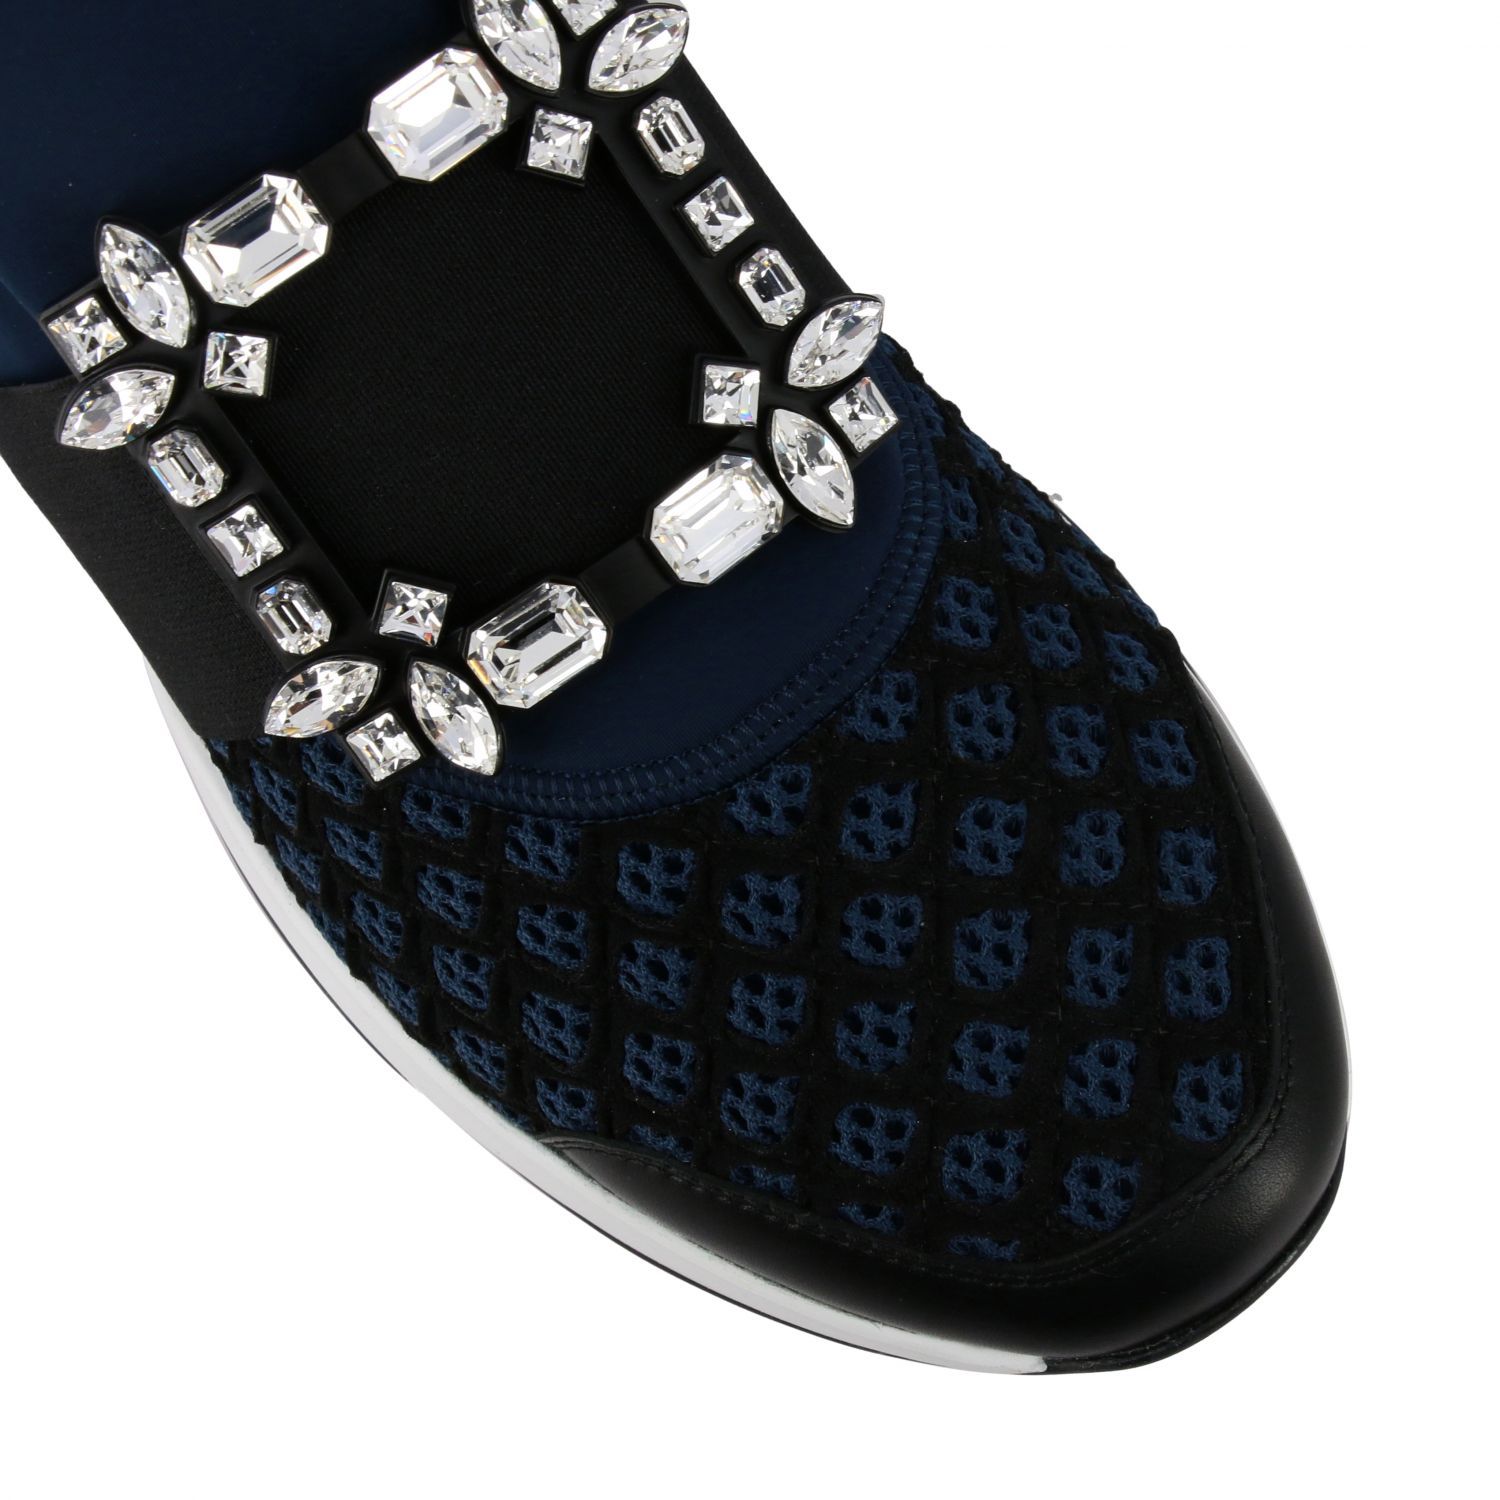 ROGER VIVIER: Viv Run sneakers in leather and mesh with rhinestone